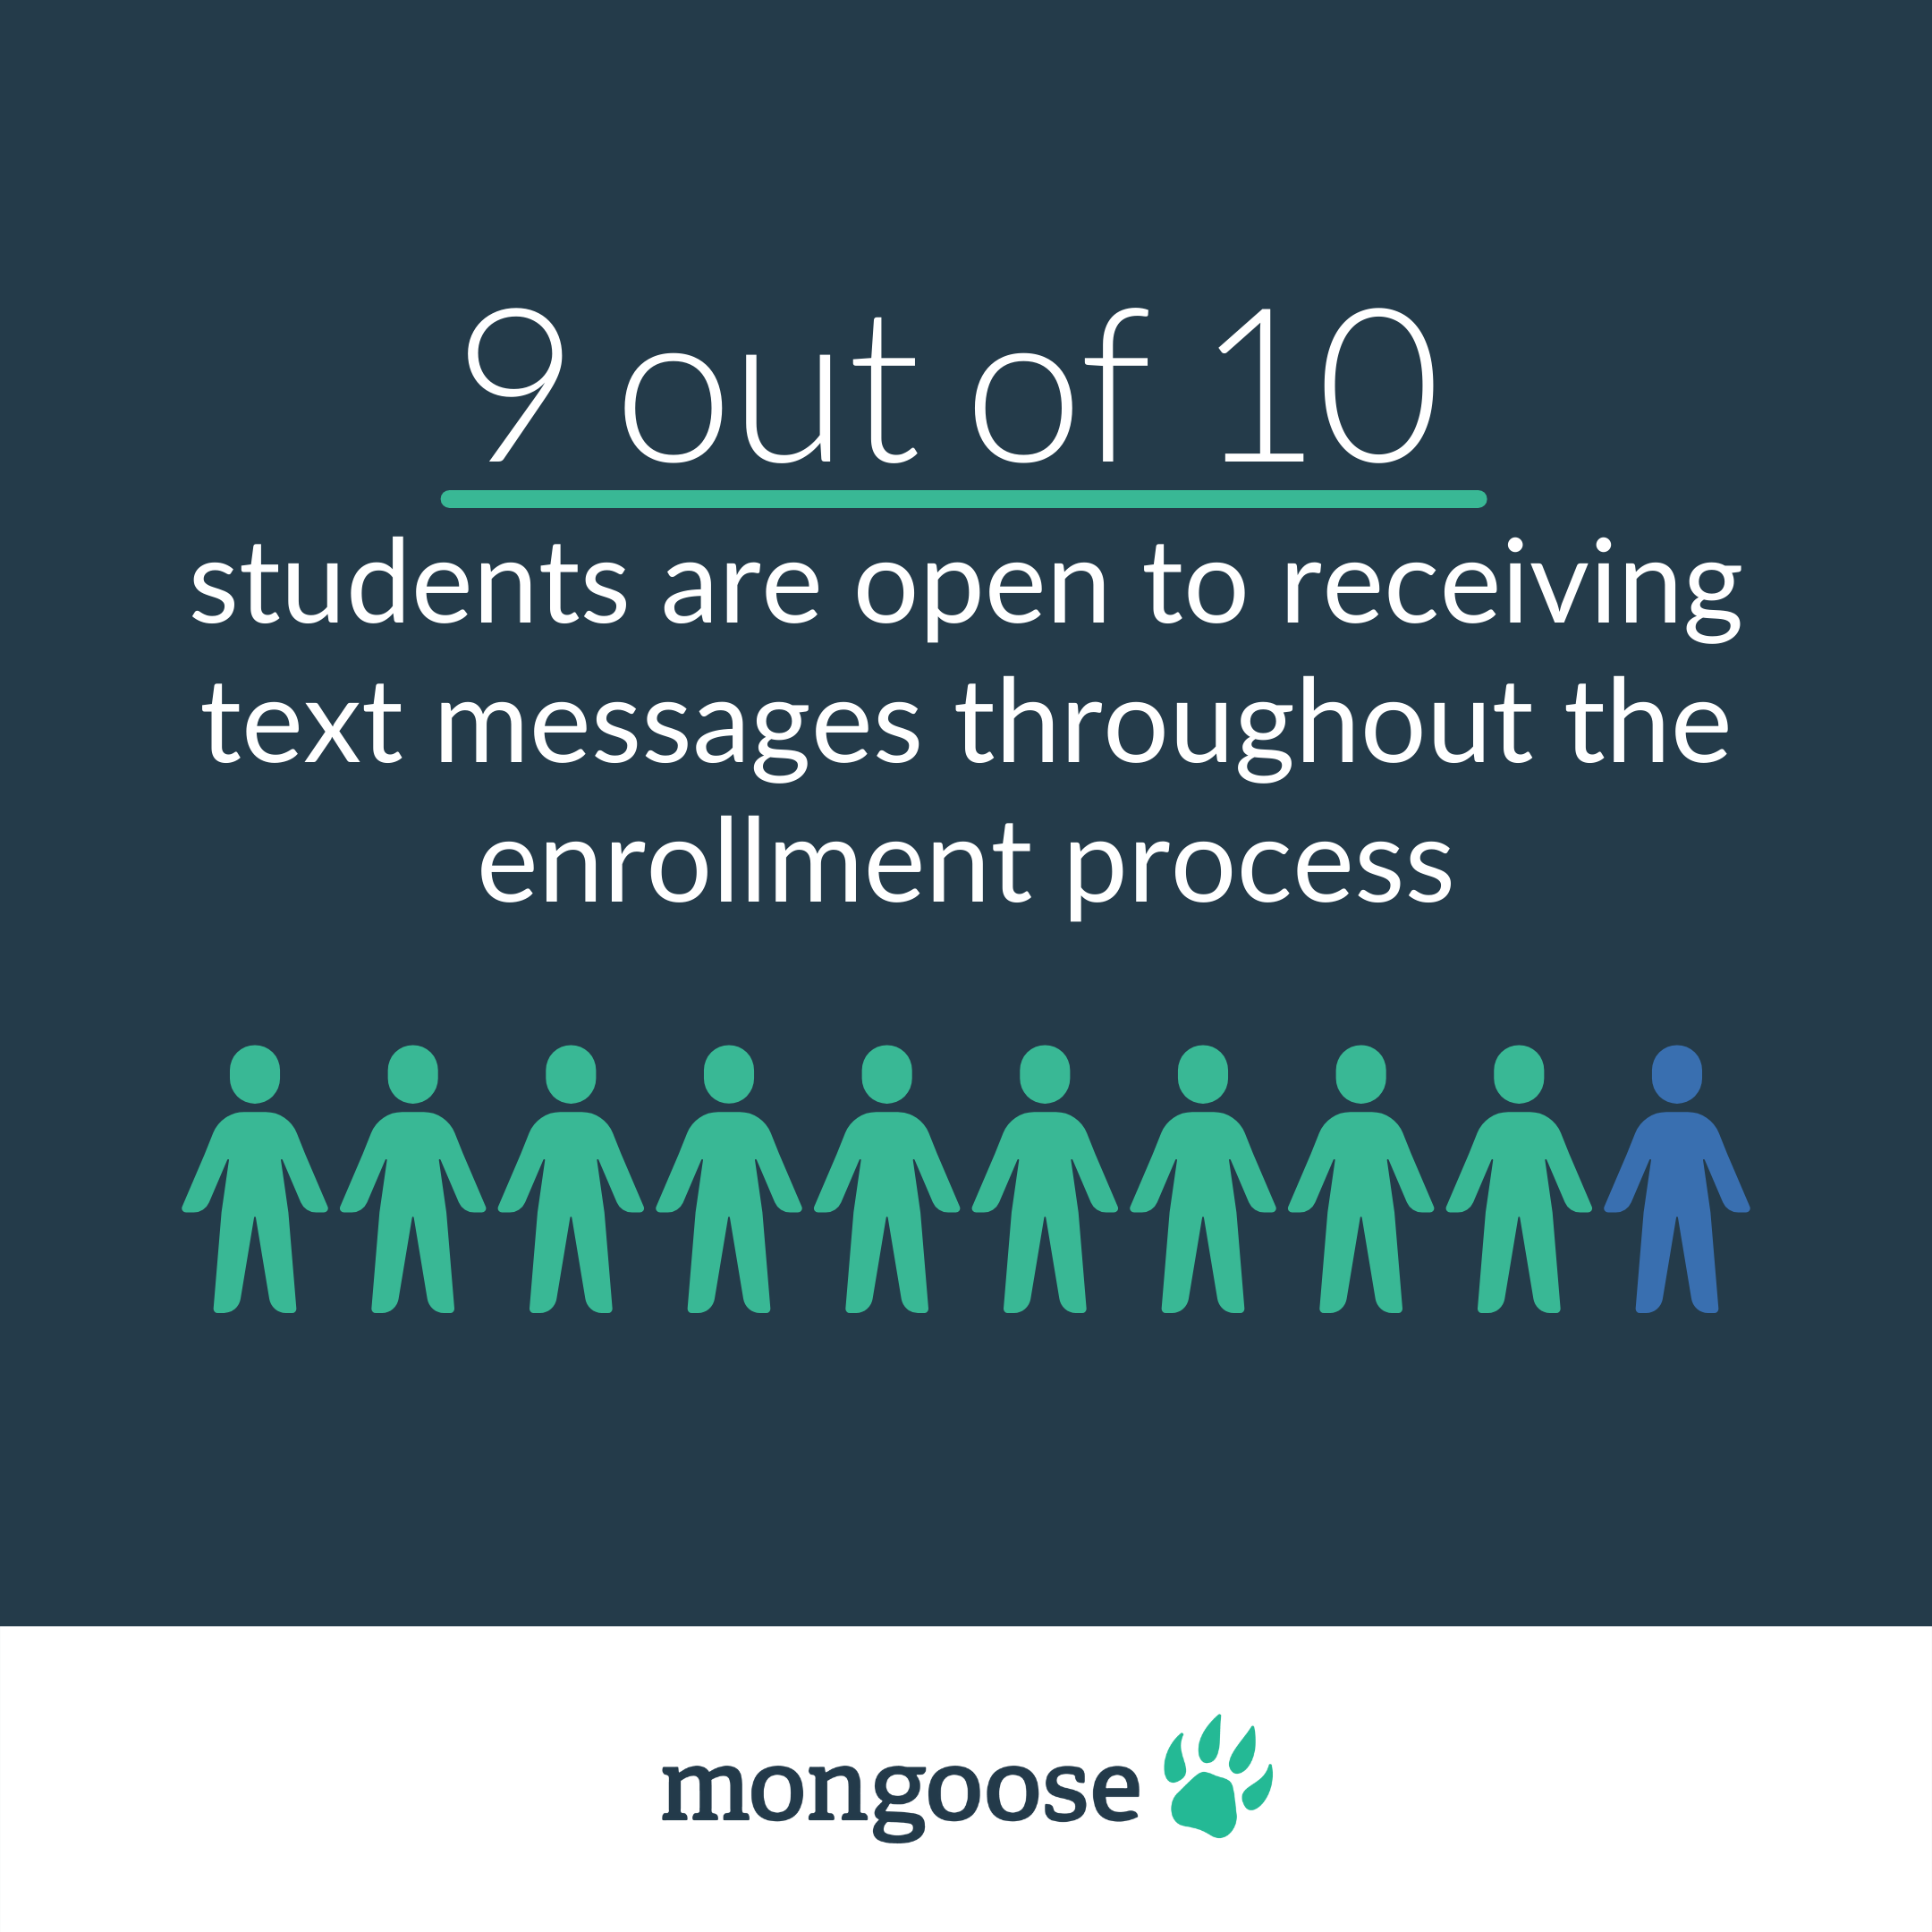 9 out of 10  students are open to receiving text messages throughout the enrollment process